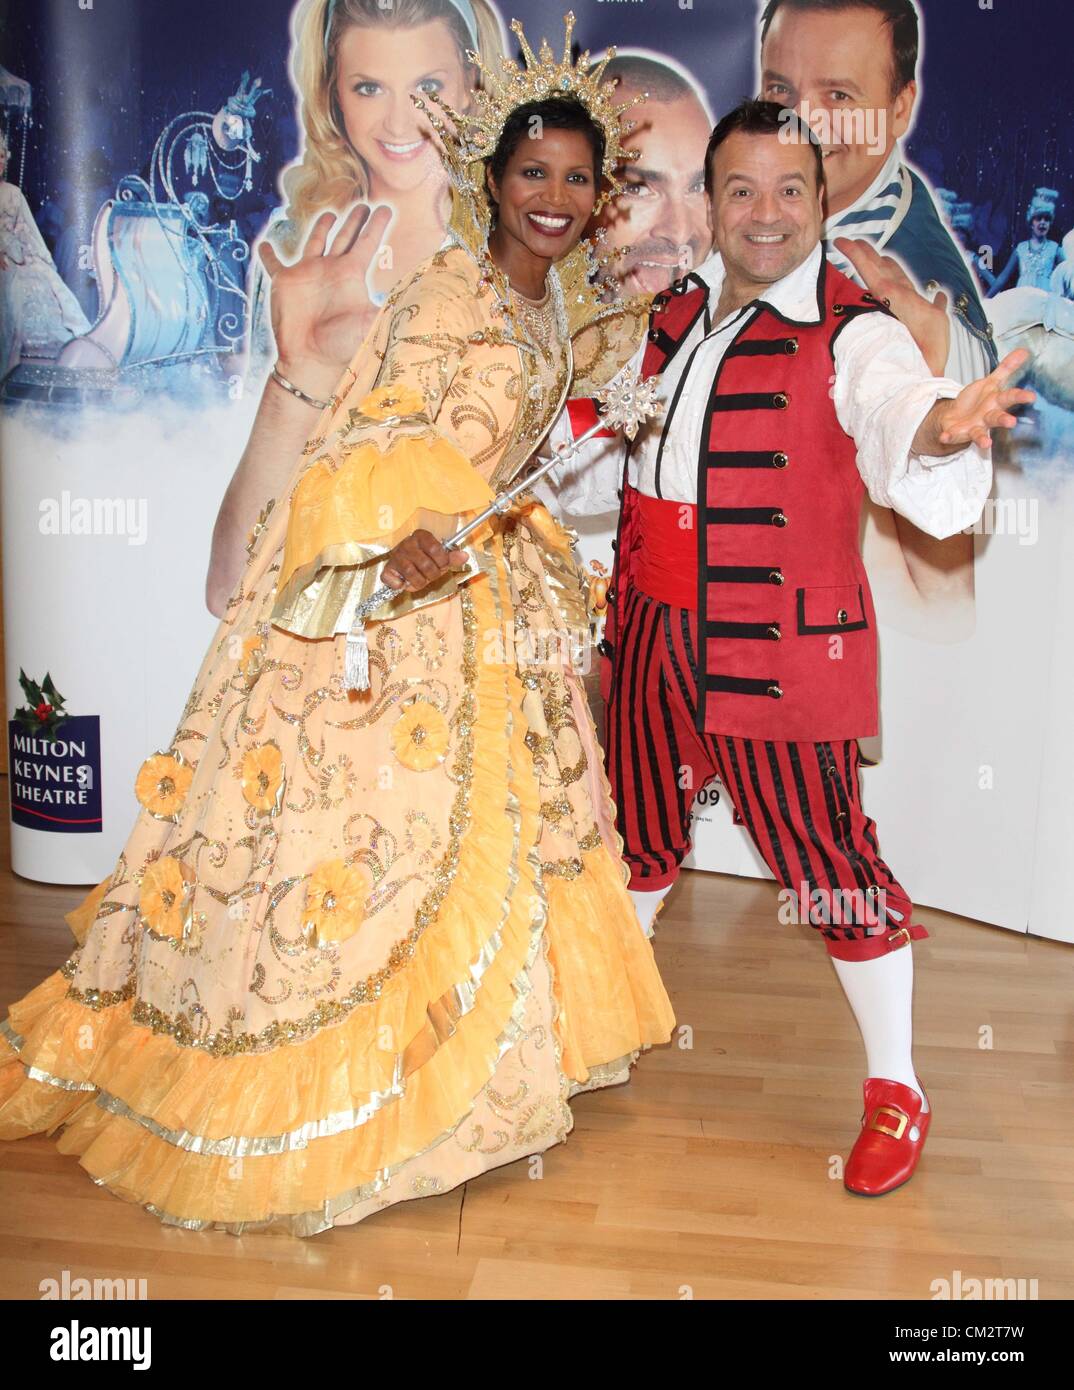 Kev Orkian and Deniece Pearson - 'Cinderella' Pantomime Press Launch at Milton Keynes Theatre, Bucks - September 21st 2012  Photo by Keith Mayhew Stock Photo